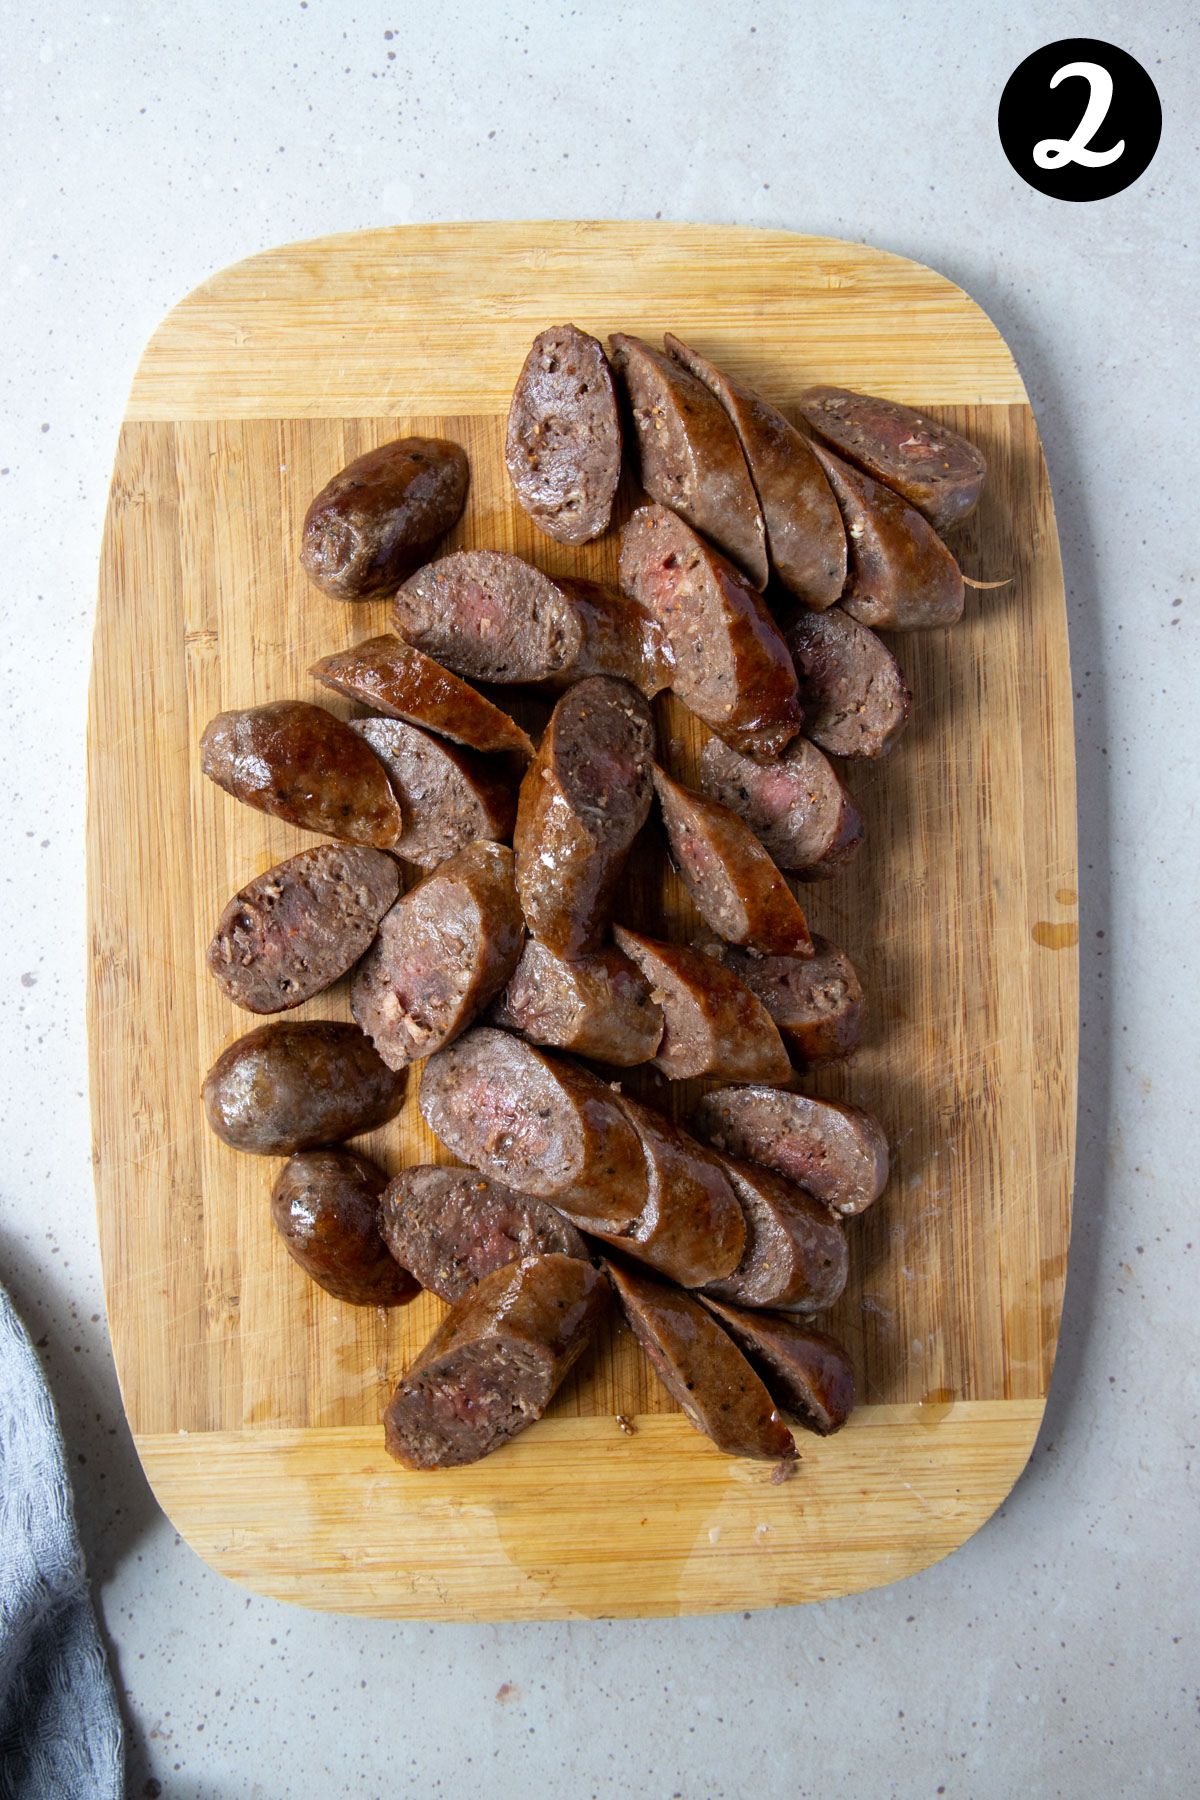 sliced sausages on a wooden board.